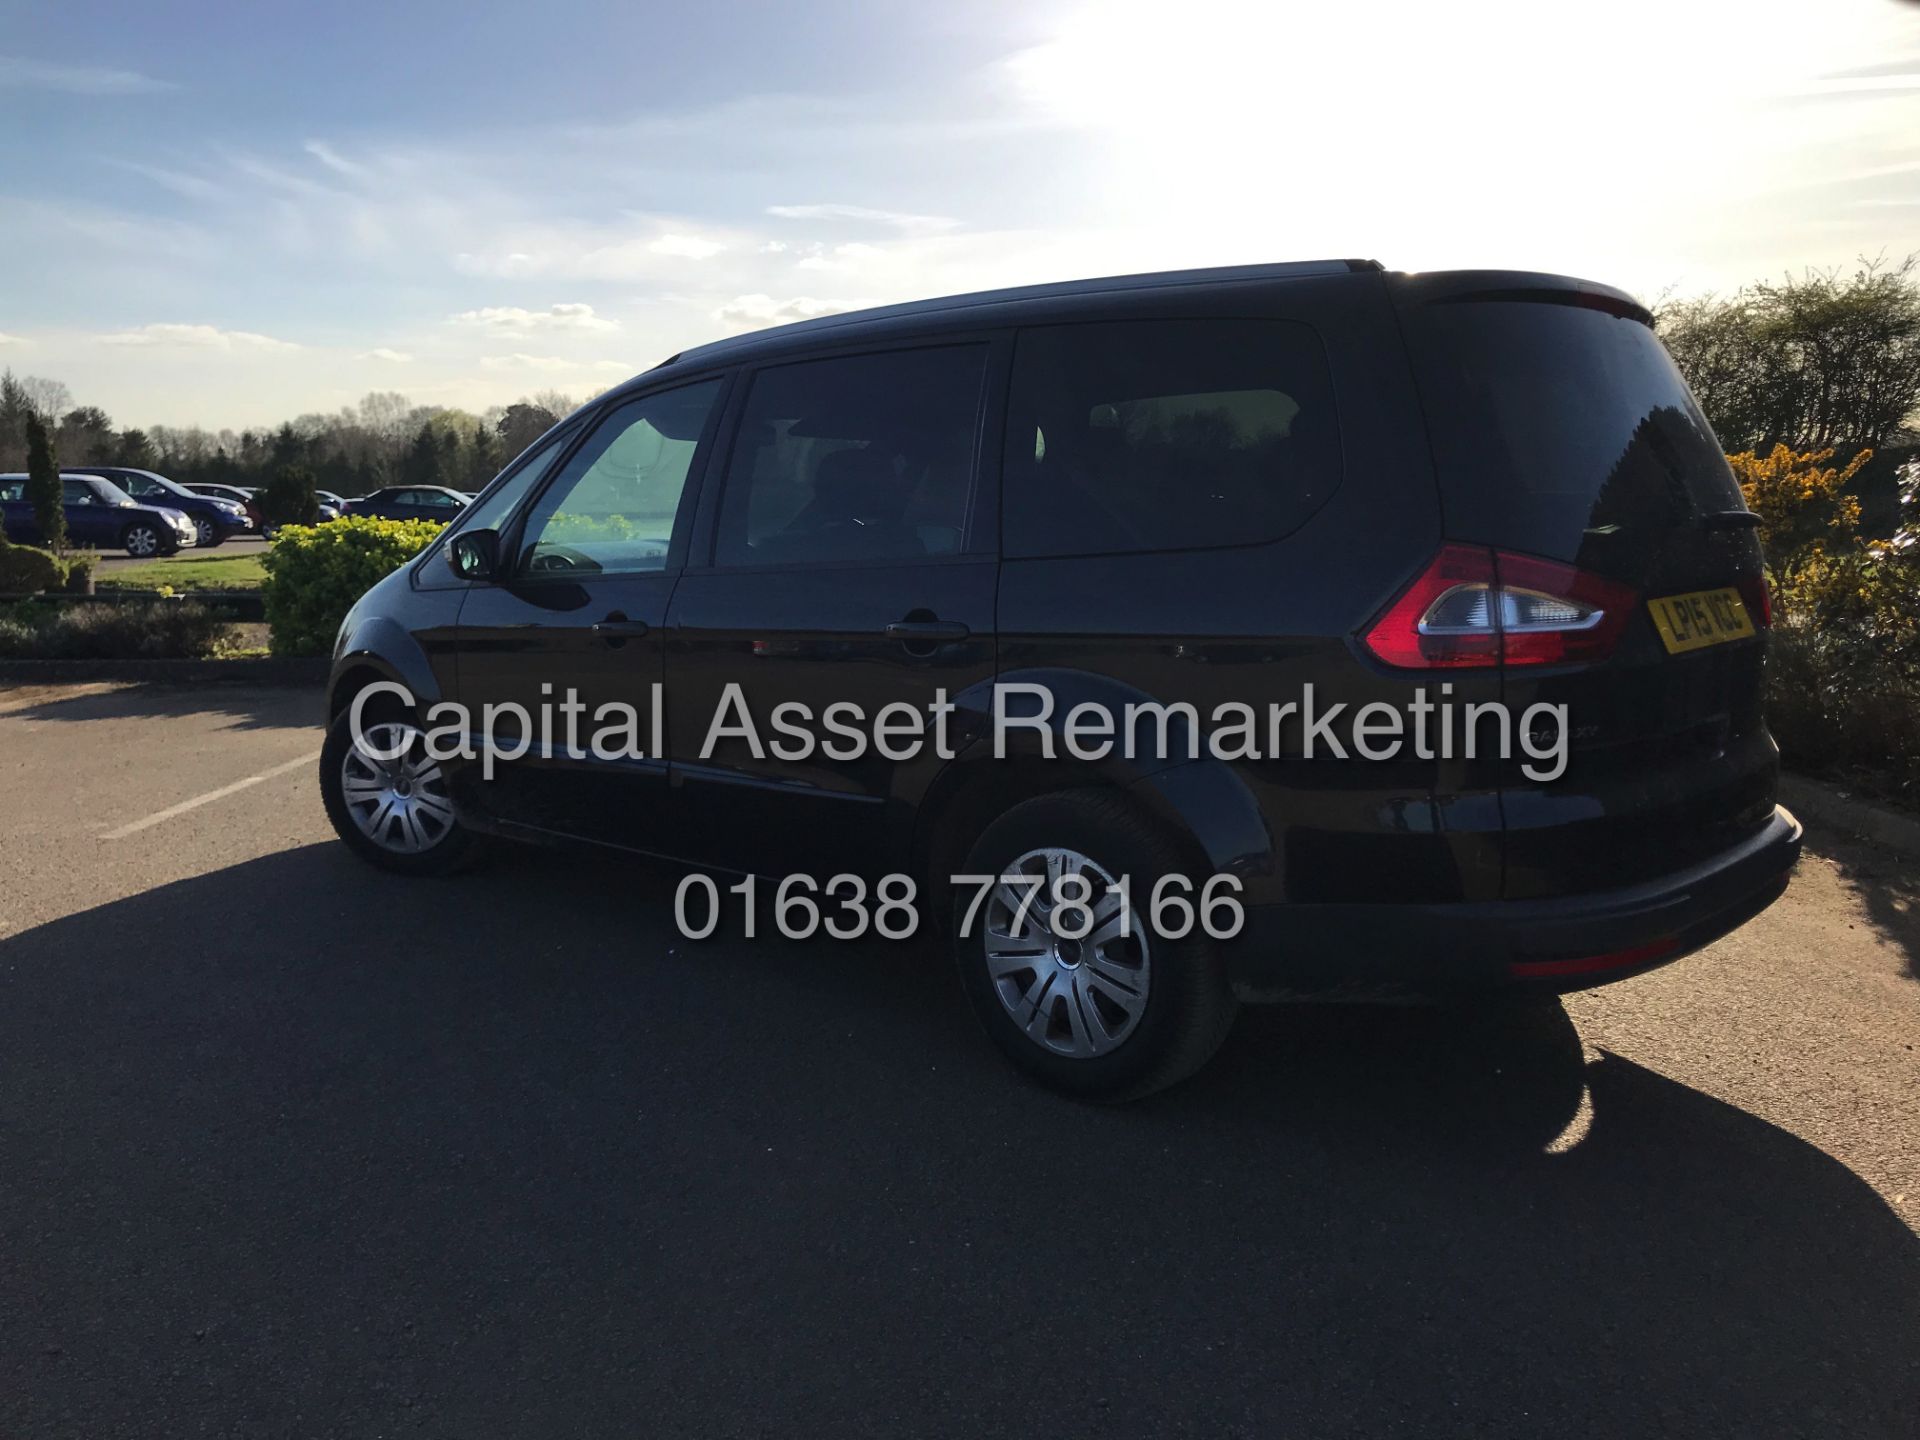 On Sale FORD GALAXY 2.0TDCI "POWER-SHIFT" 7 SEATER (15 REG) 1 OWNER - 140BHP - AIR CON - ELEC PACK - Image 5 of 20